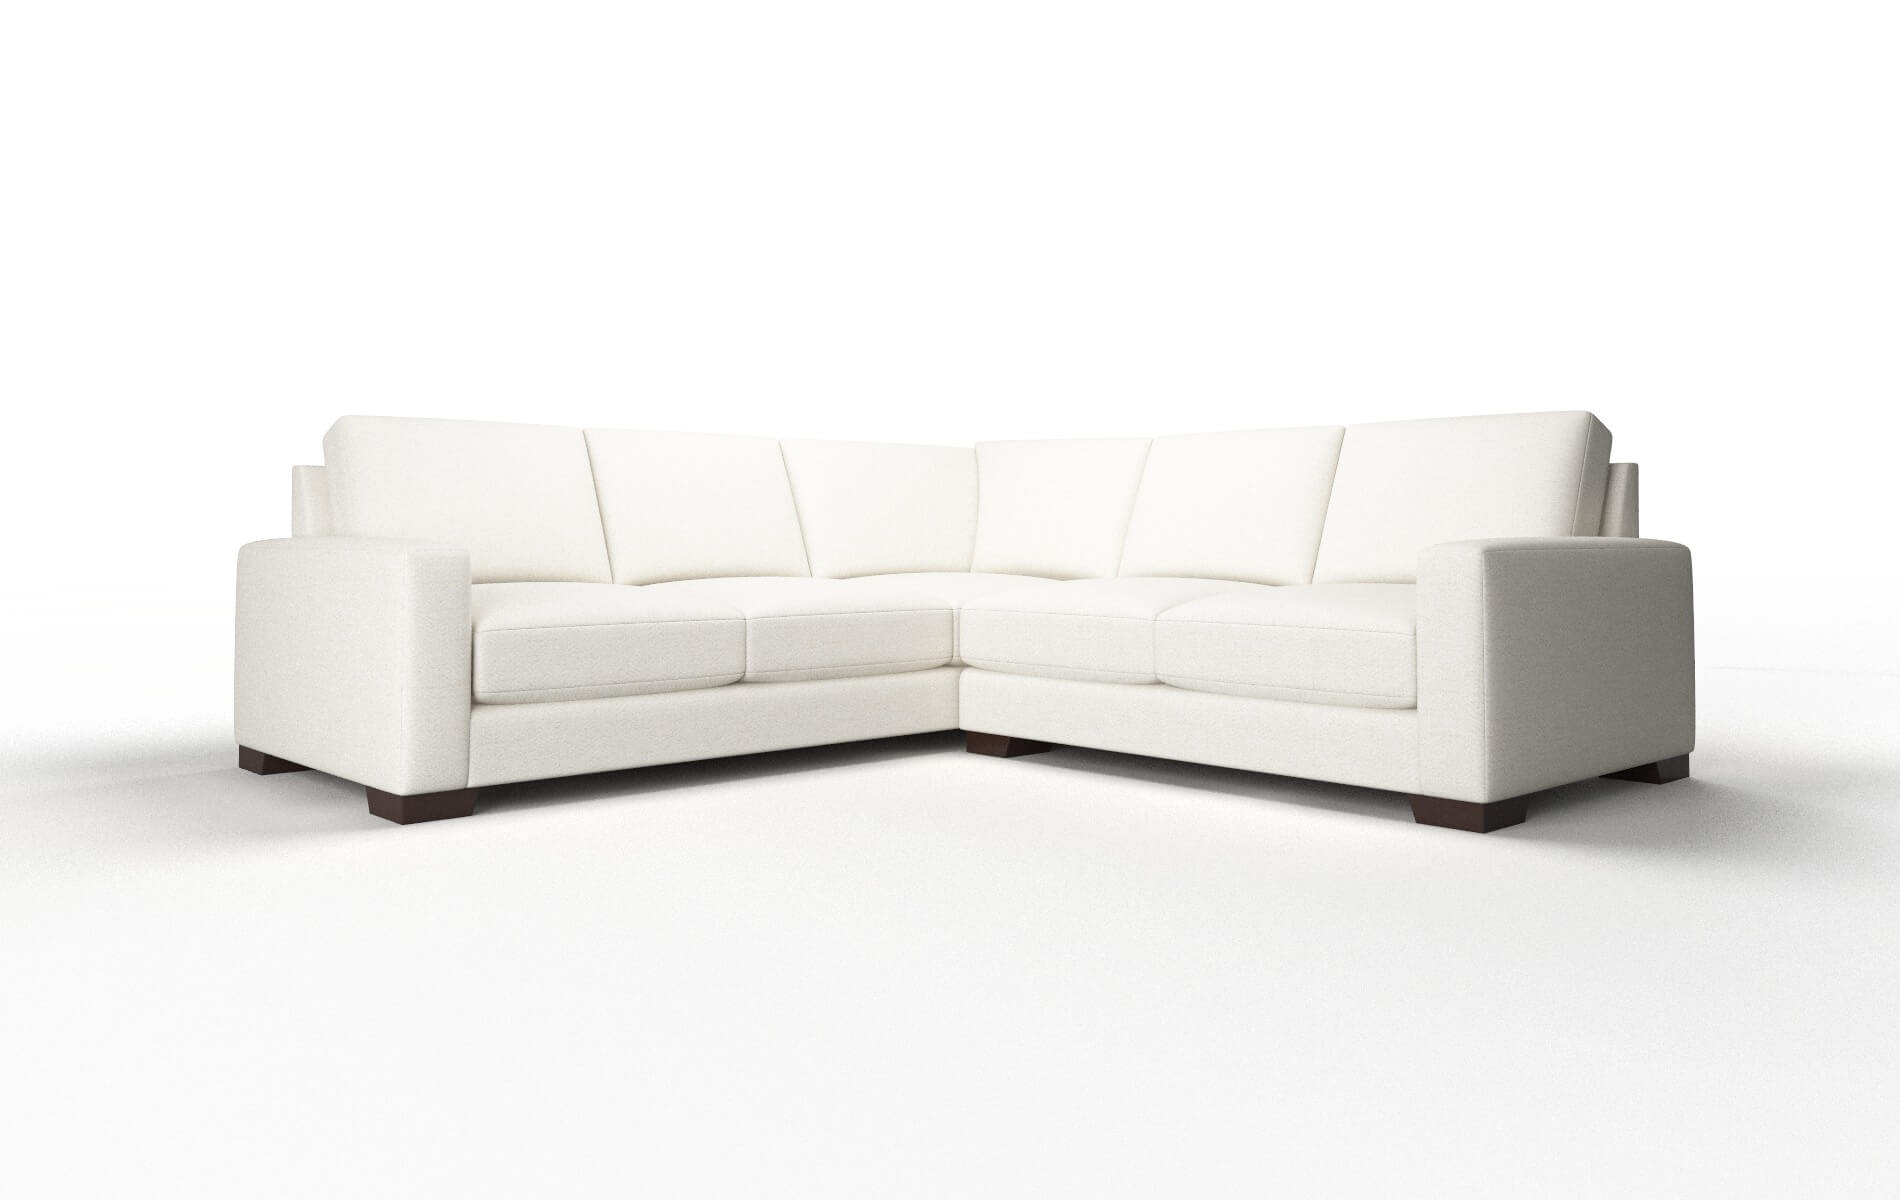 London Catalina Ivory Sectional espresso legs 1